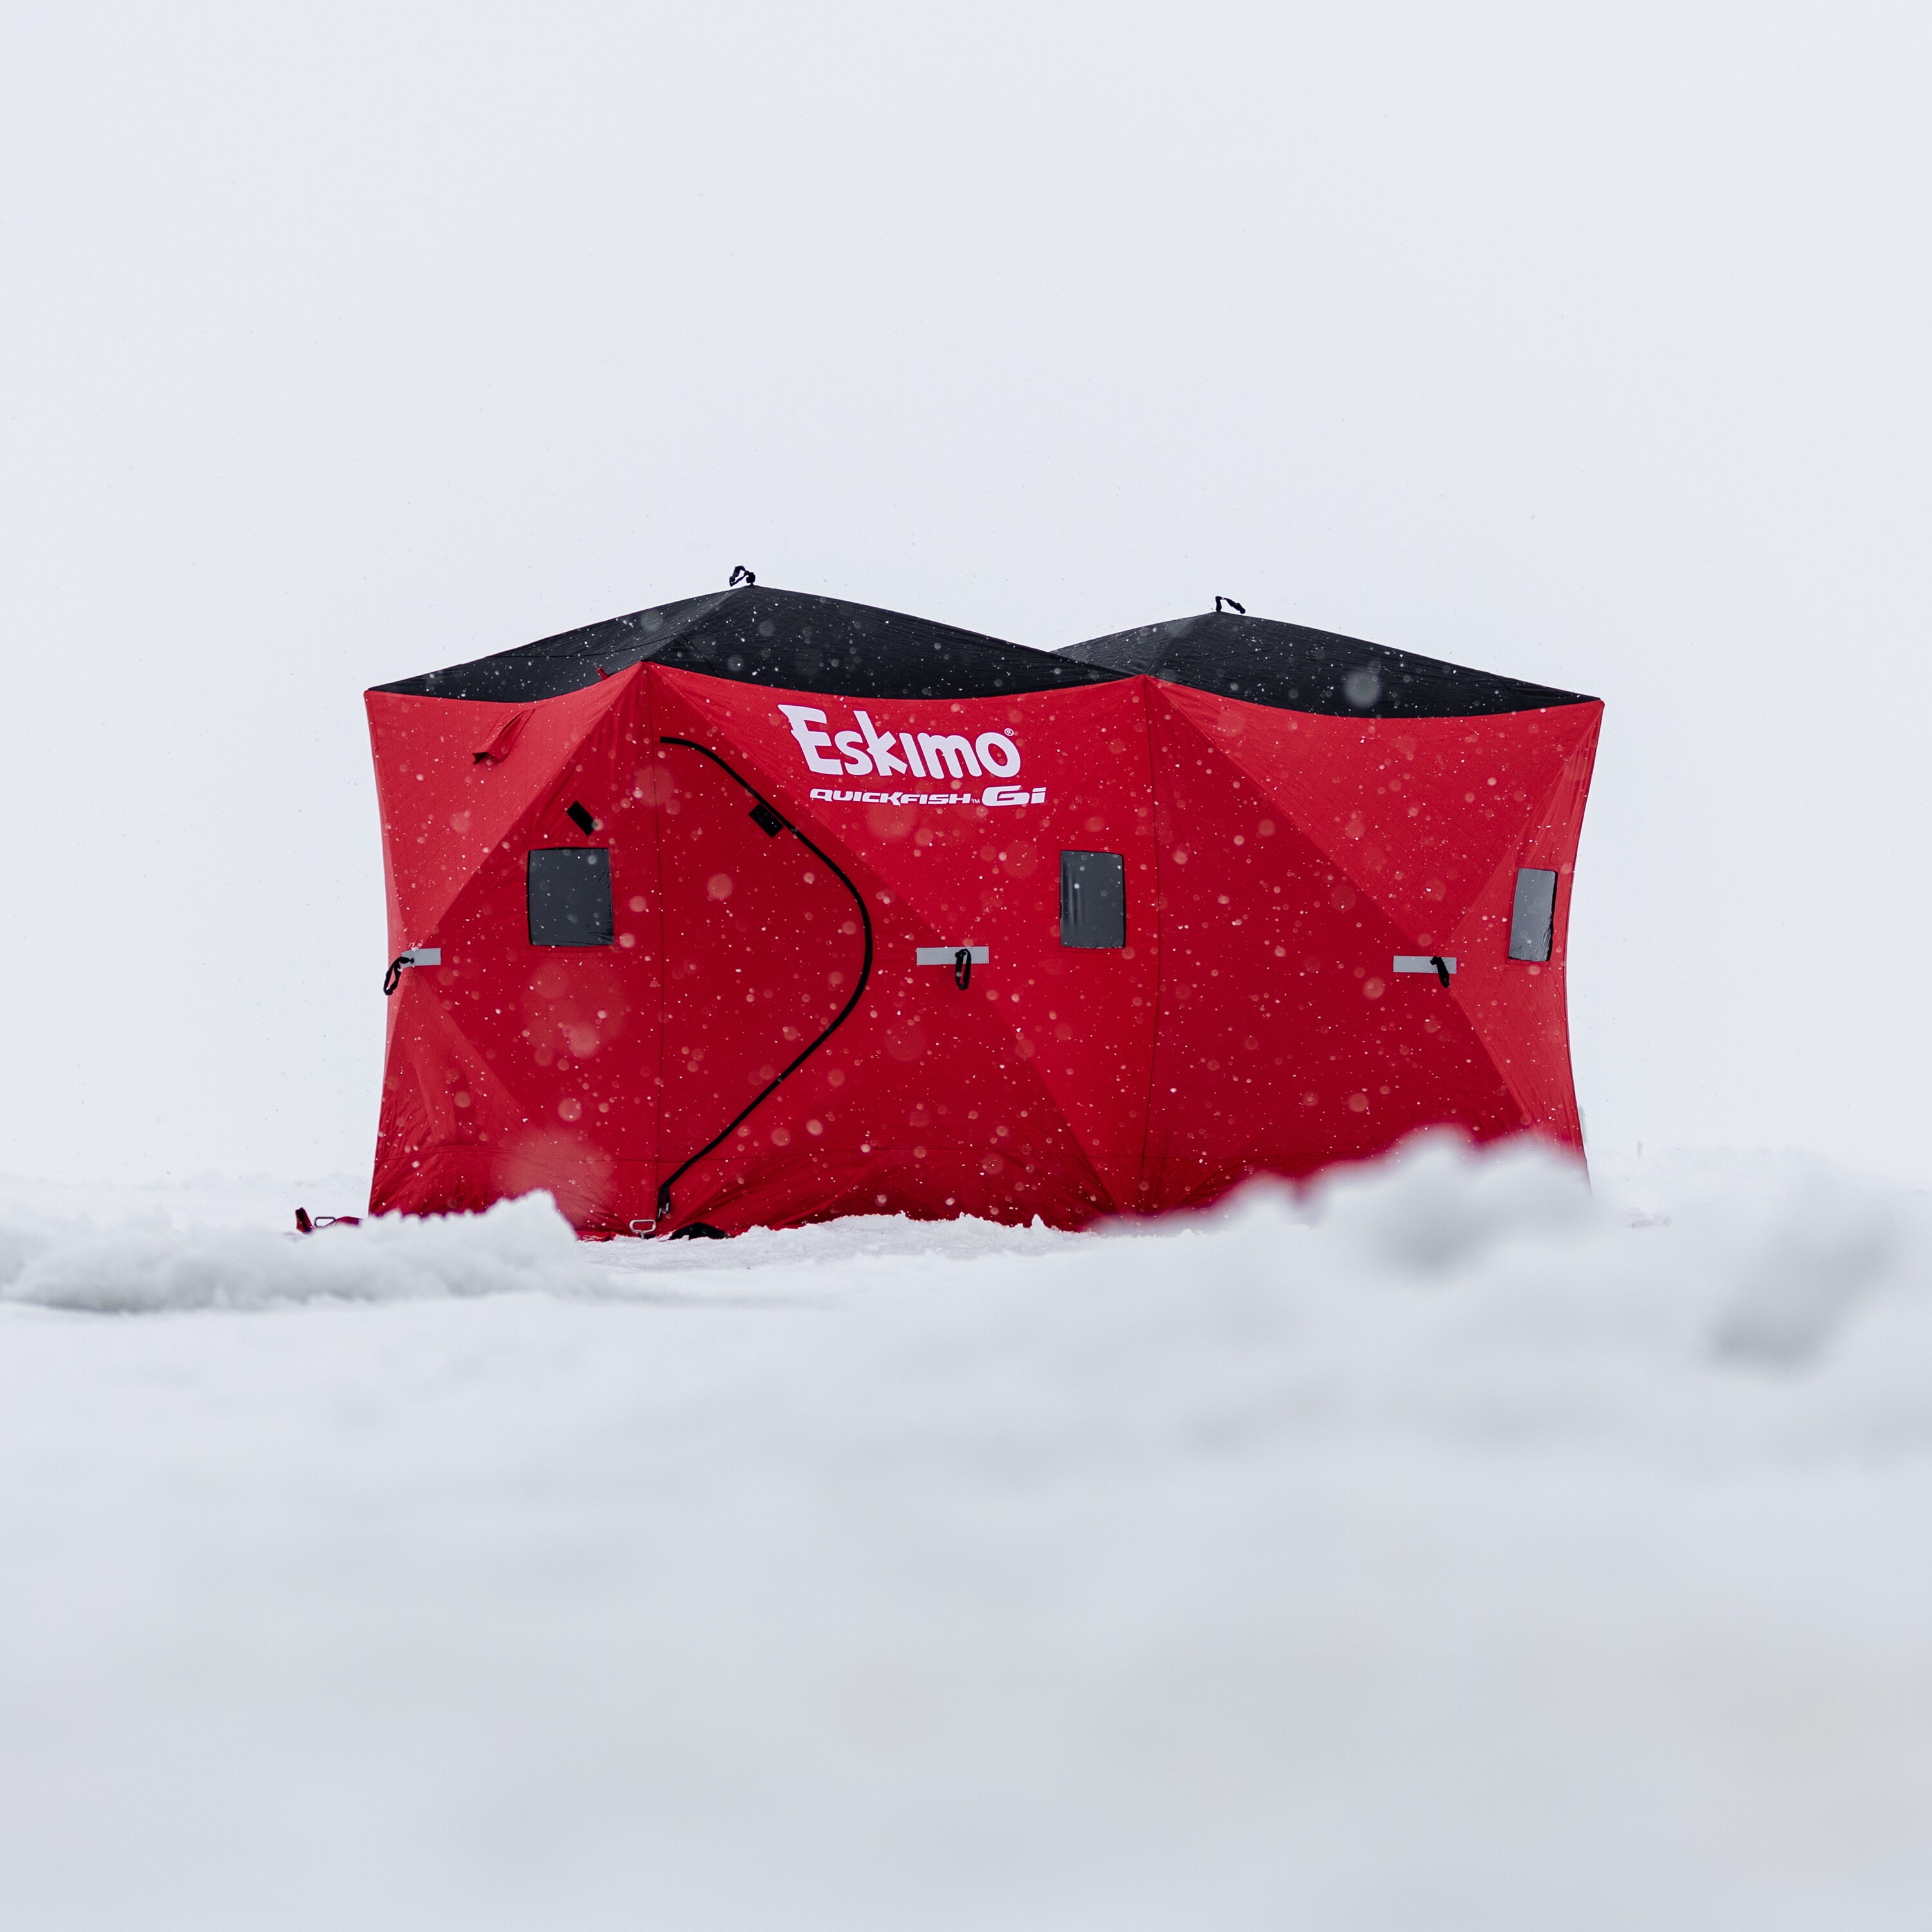 Eskimo QuickFish 6i Portable Ice Shelter Fishing Storage Cabinet in the  Fishing Equipment department at